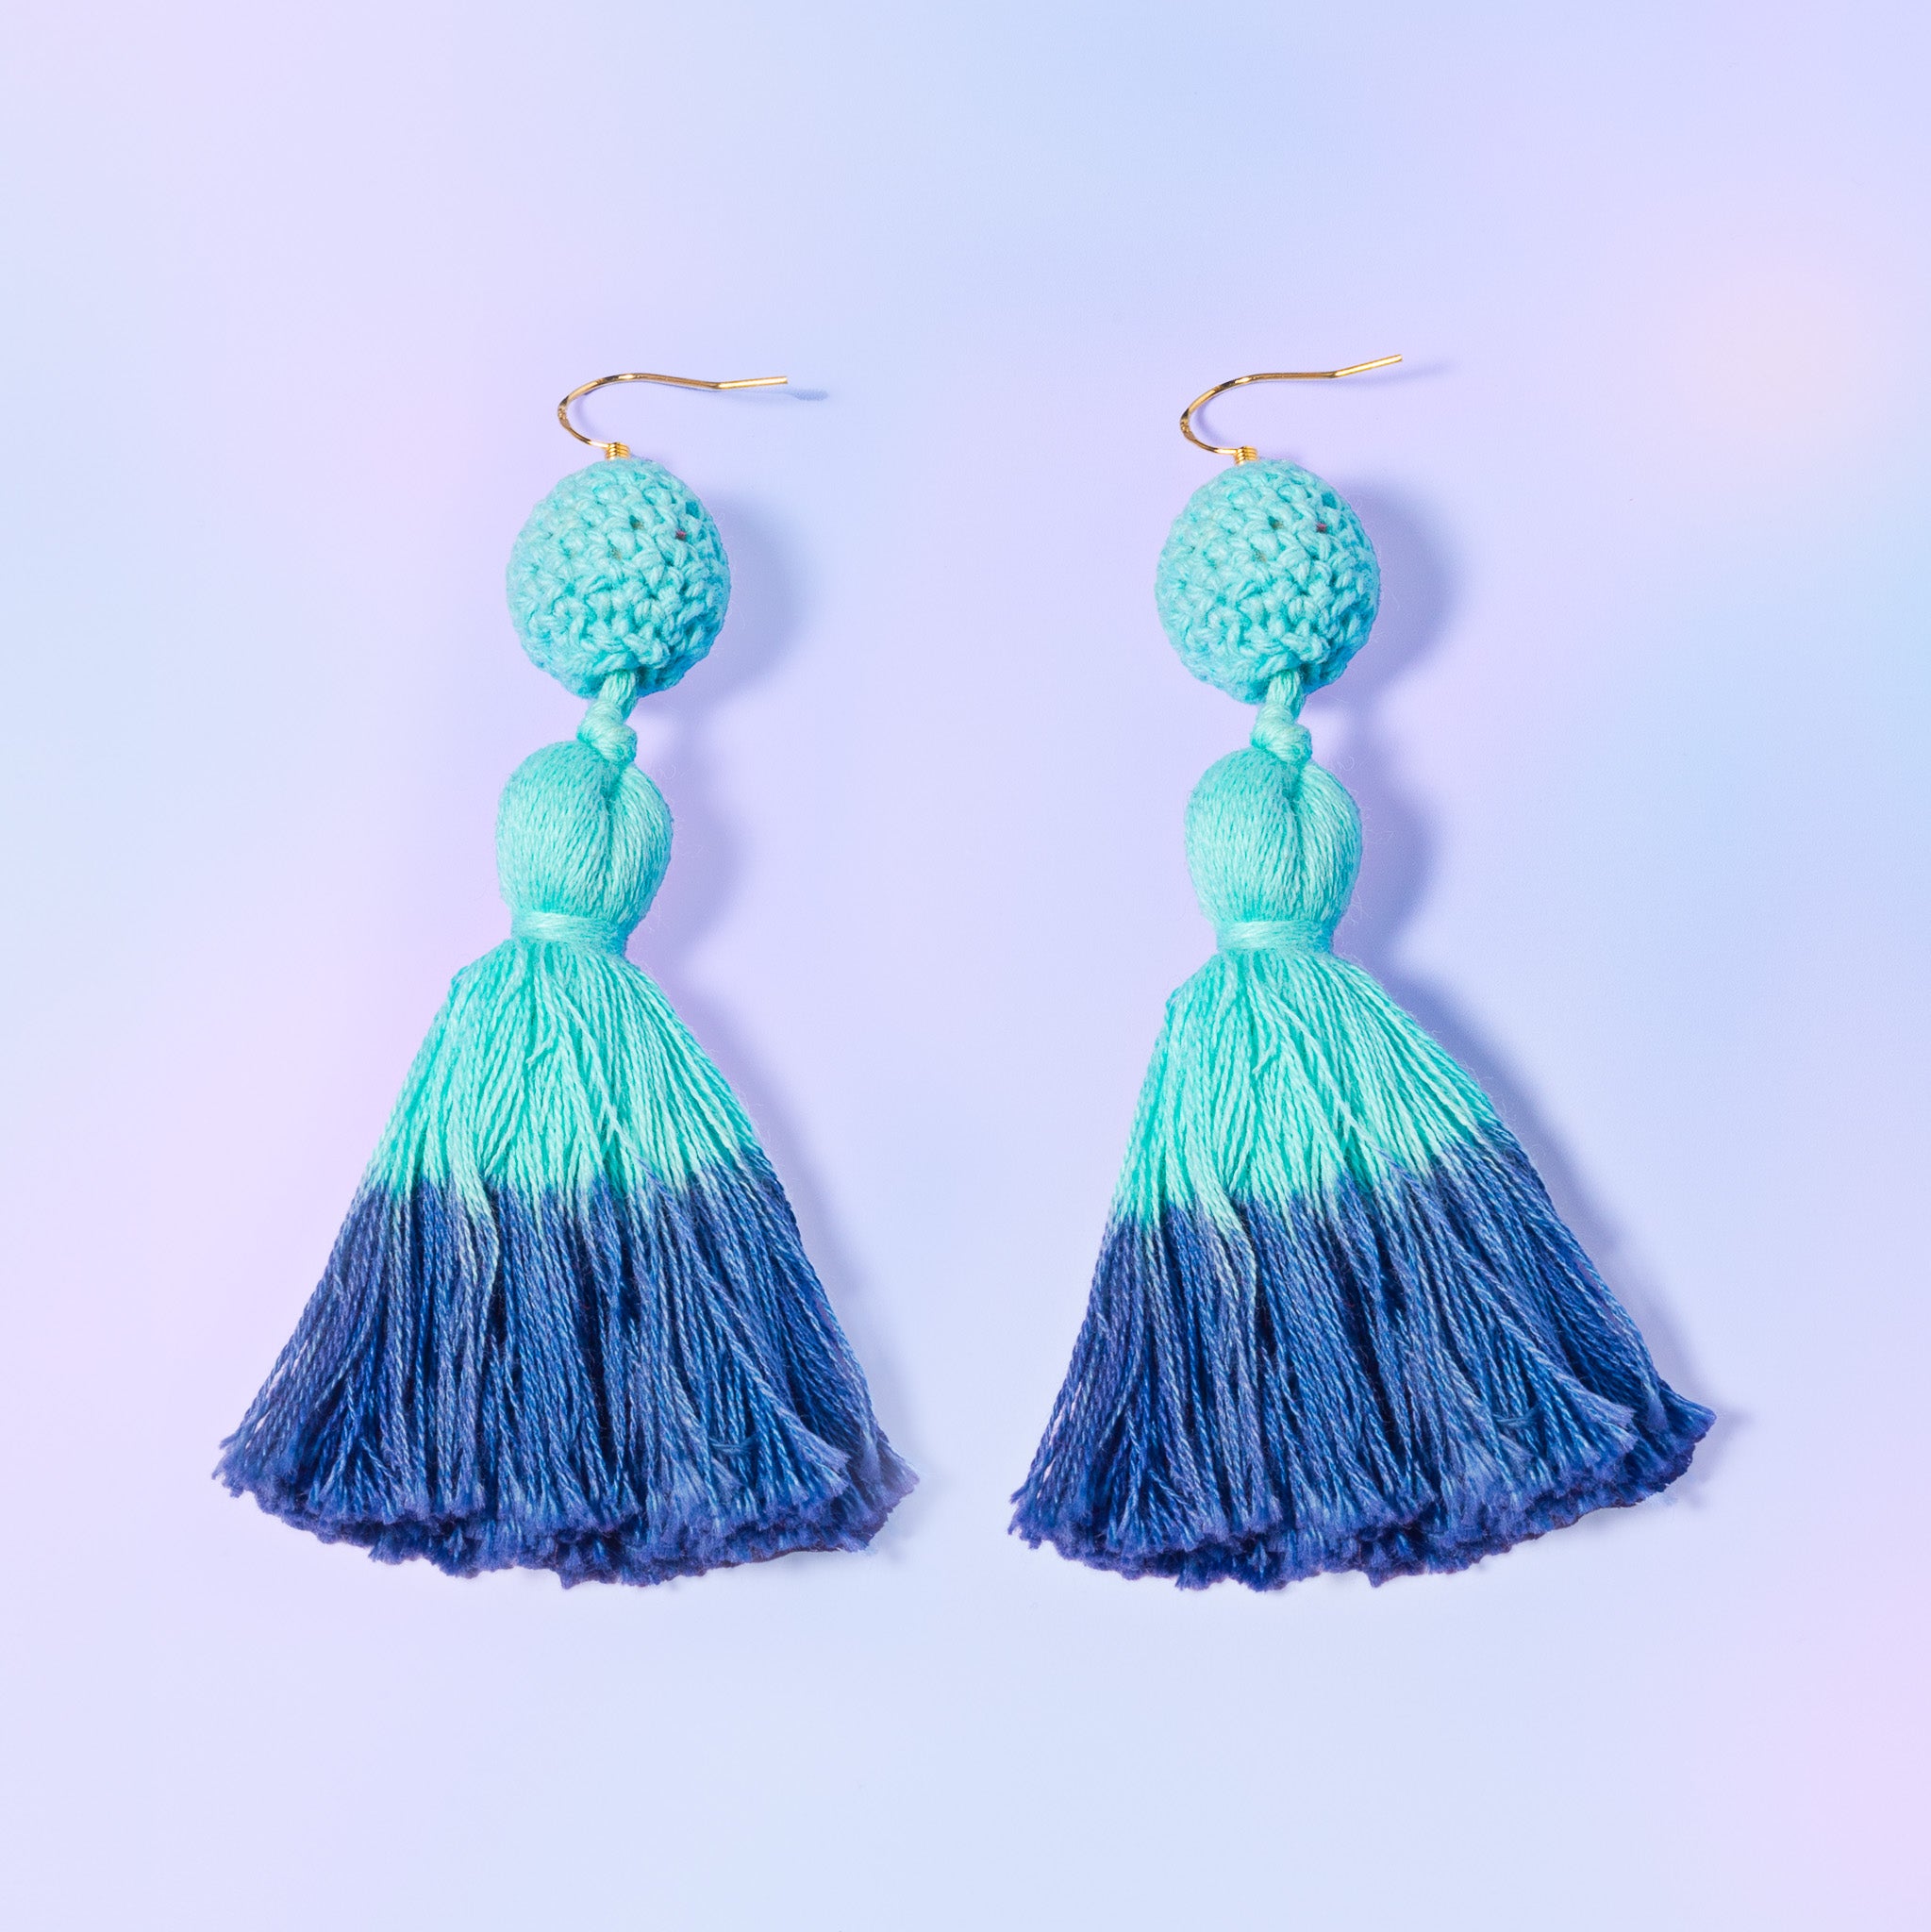 a pair of blue and green tasselled earrings